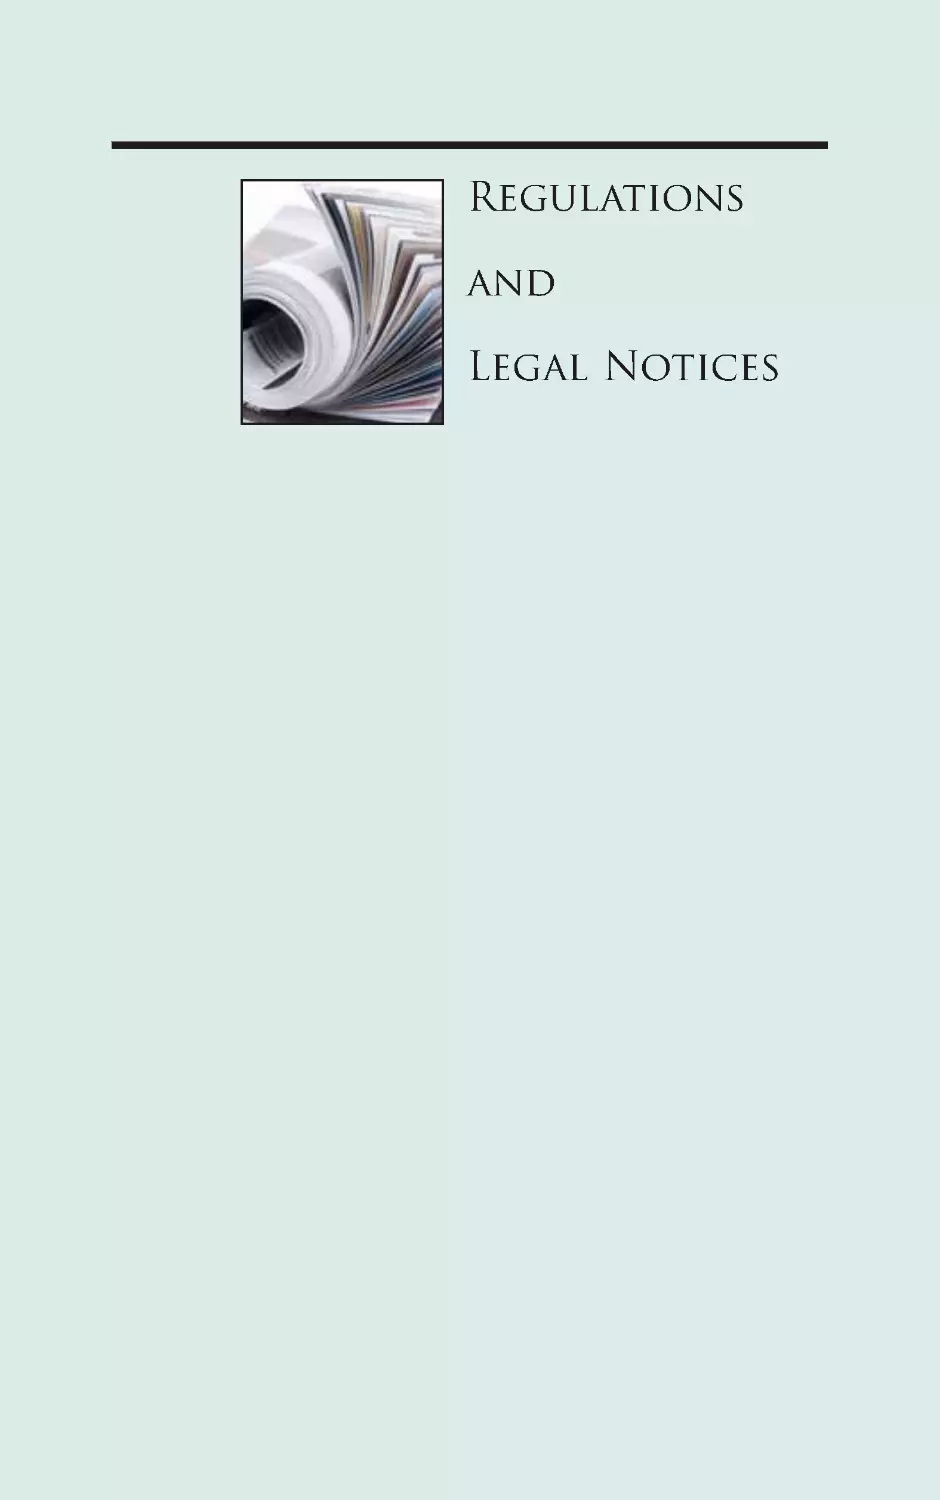 Regulations and Legal Notices